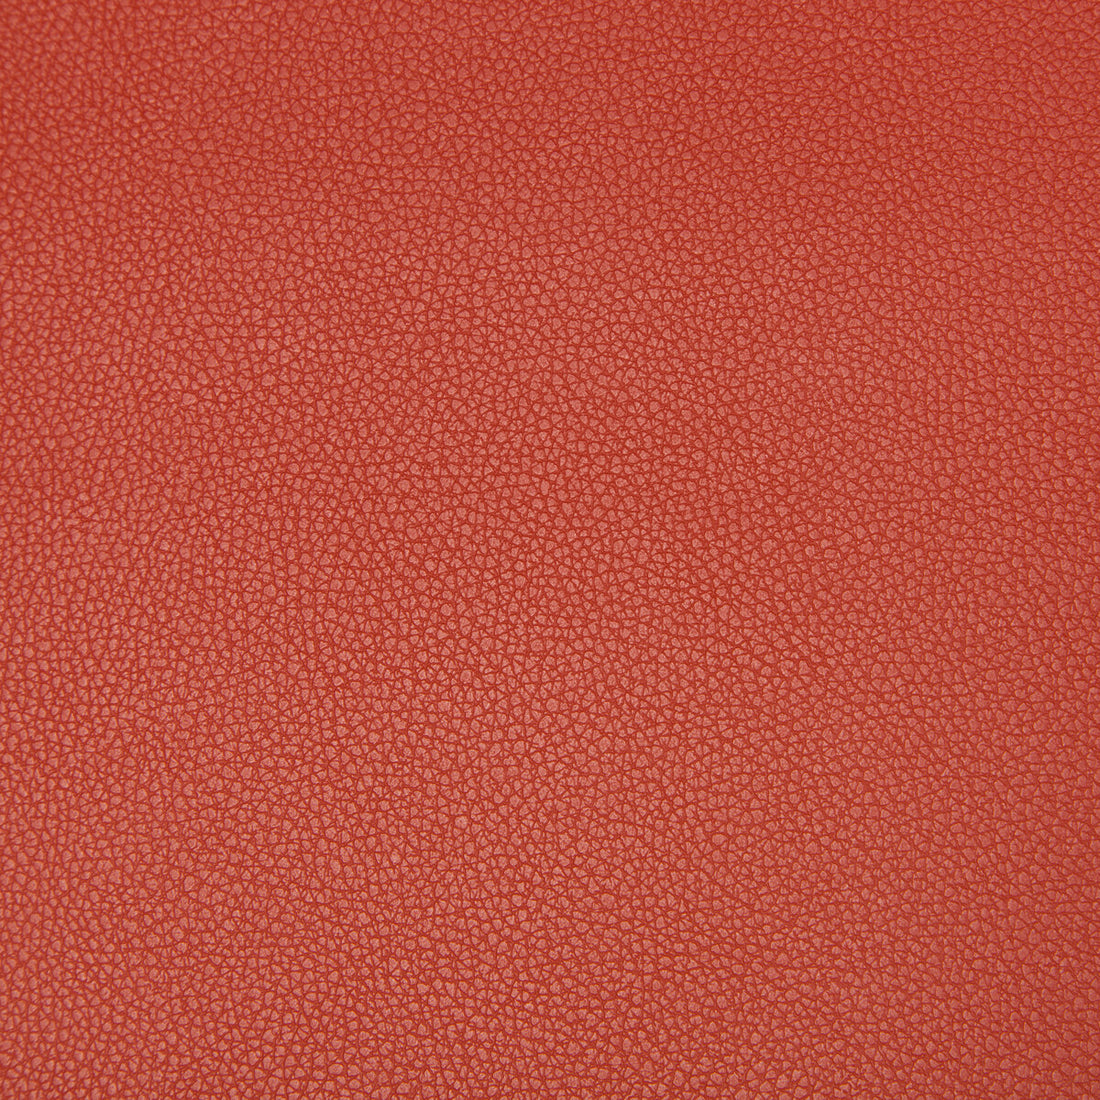 Syrus fabric in brick color - pattern SYRUS.1219.0 - by Kravet Contract